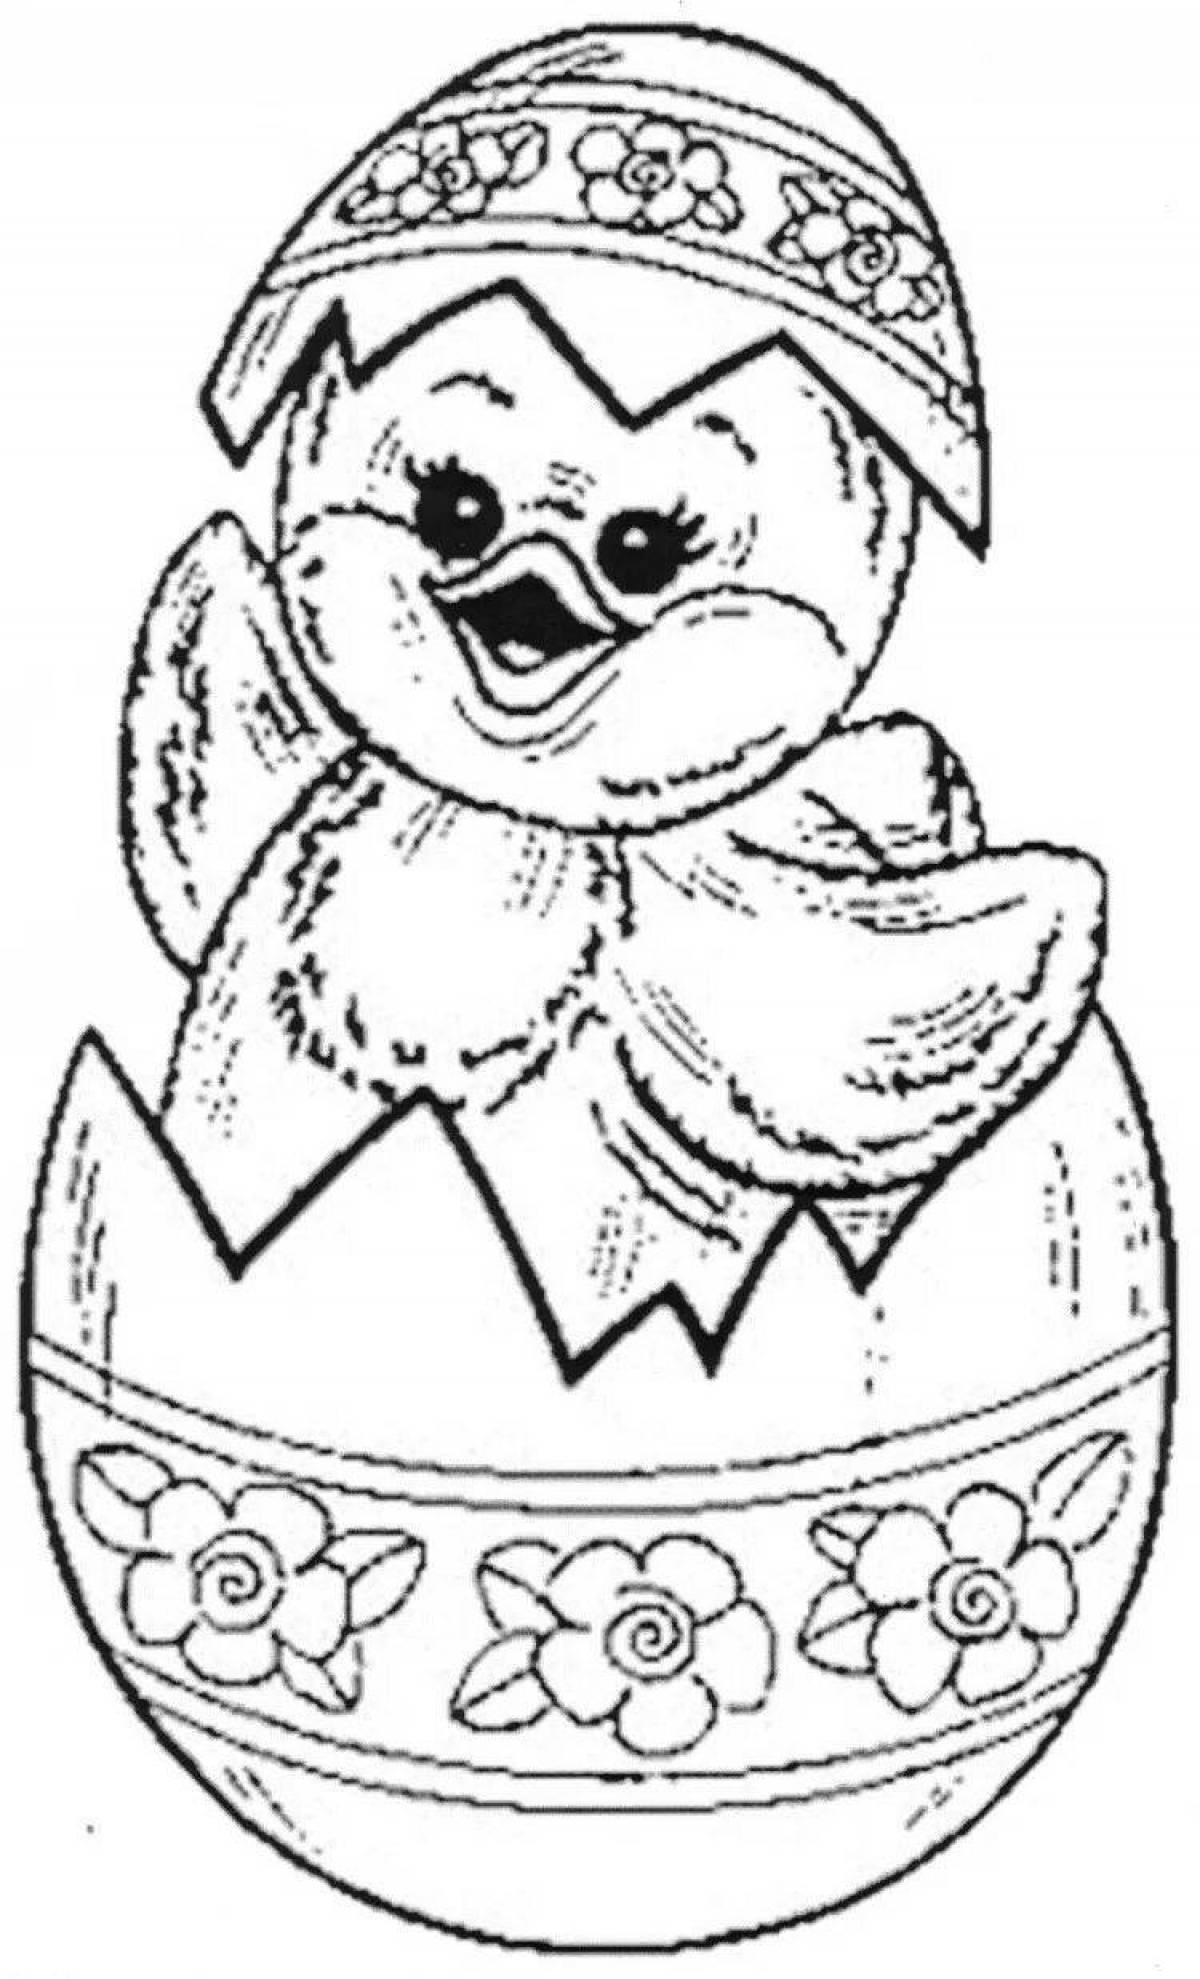 Amazing coloring pages with Easter symbols